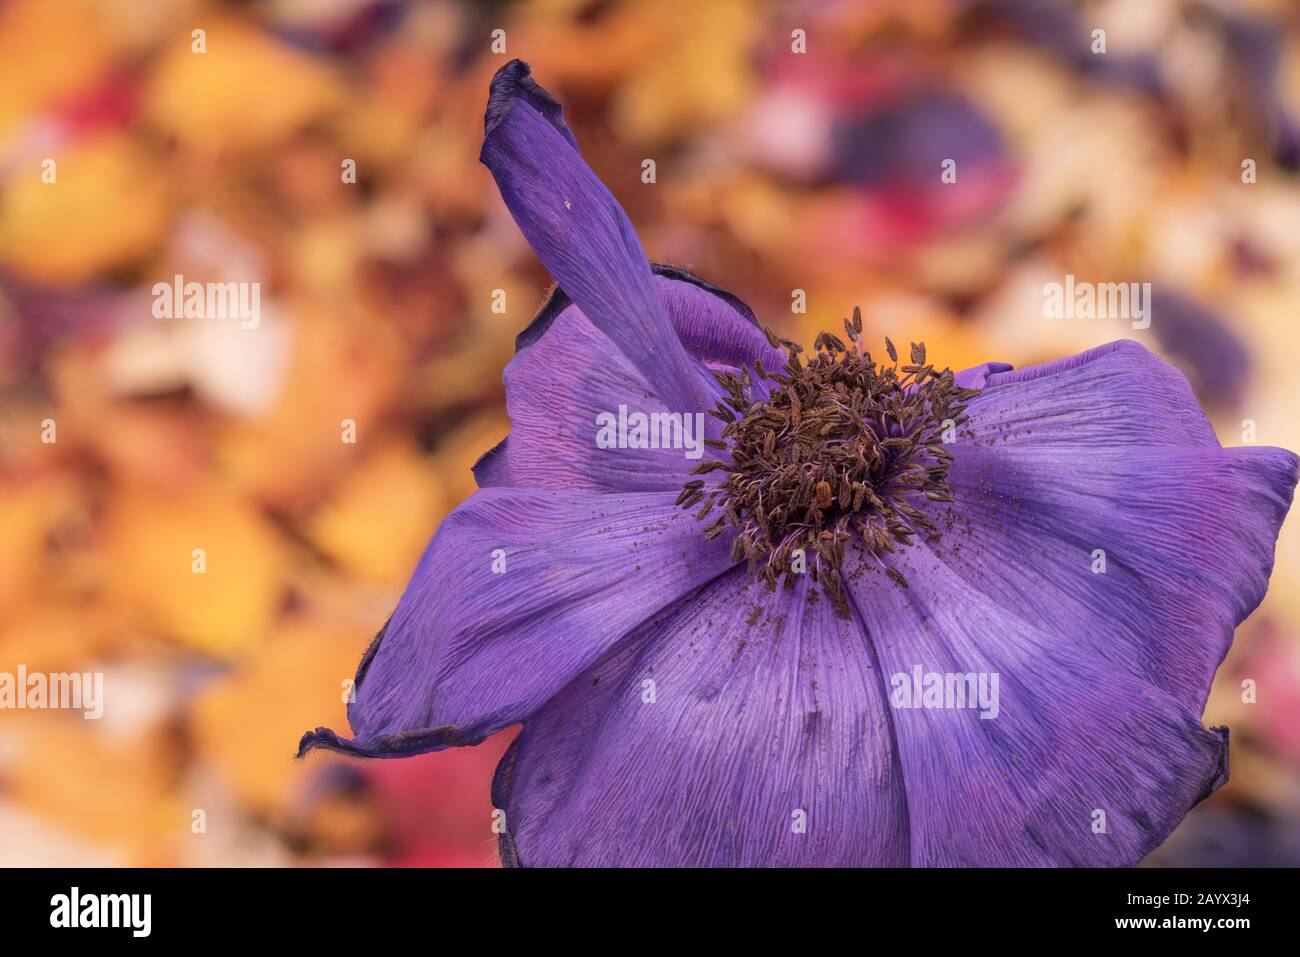 Violet blue anemone blossom on a blurred colorful bed of petals macro Stock Photo